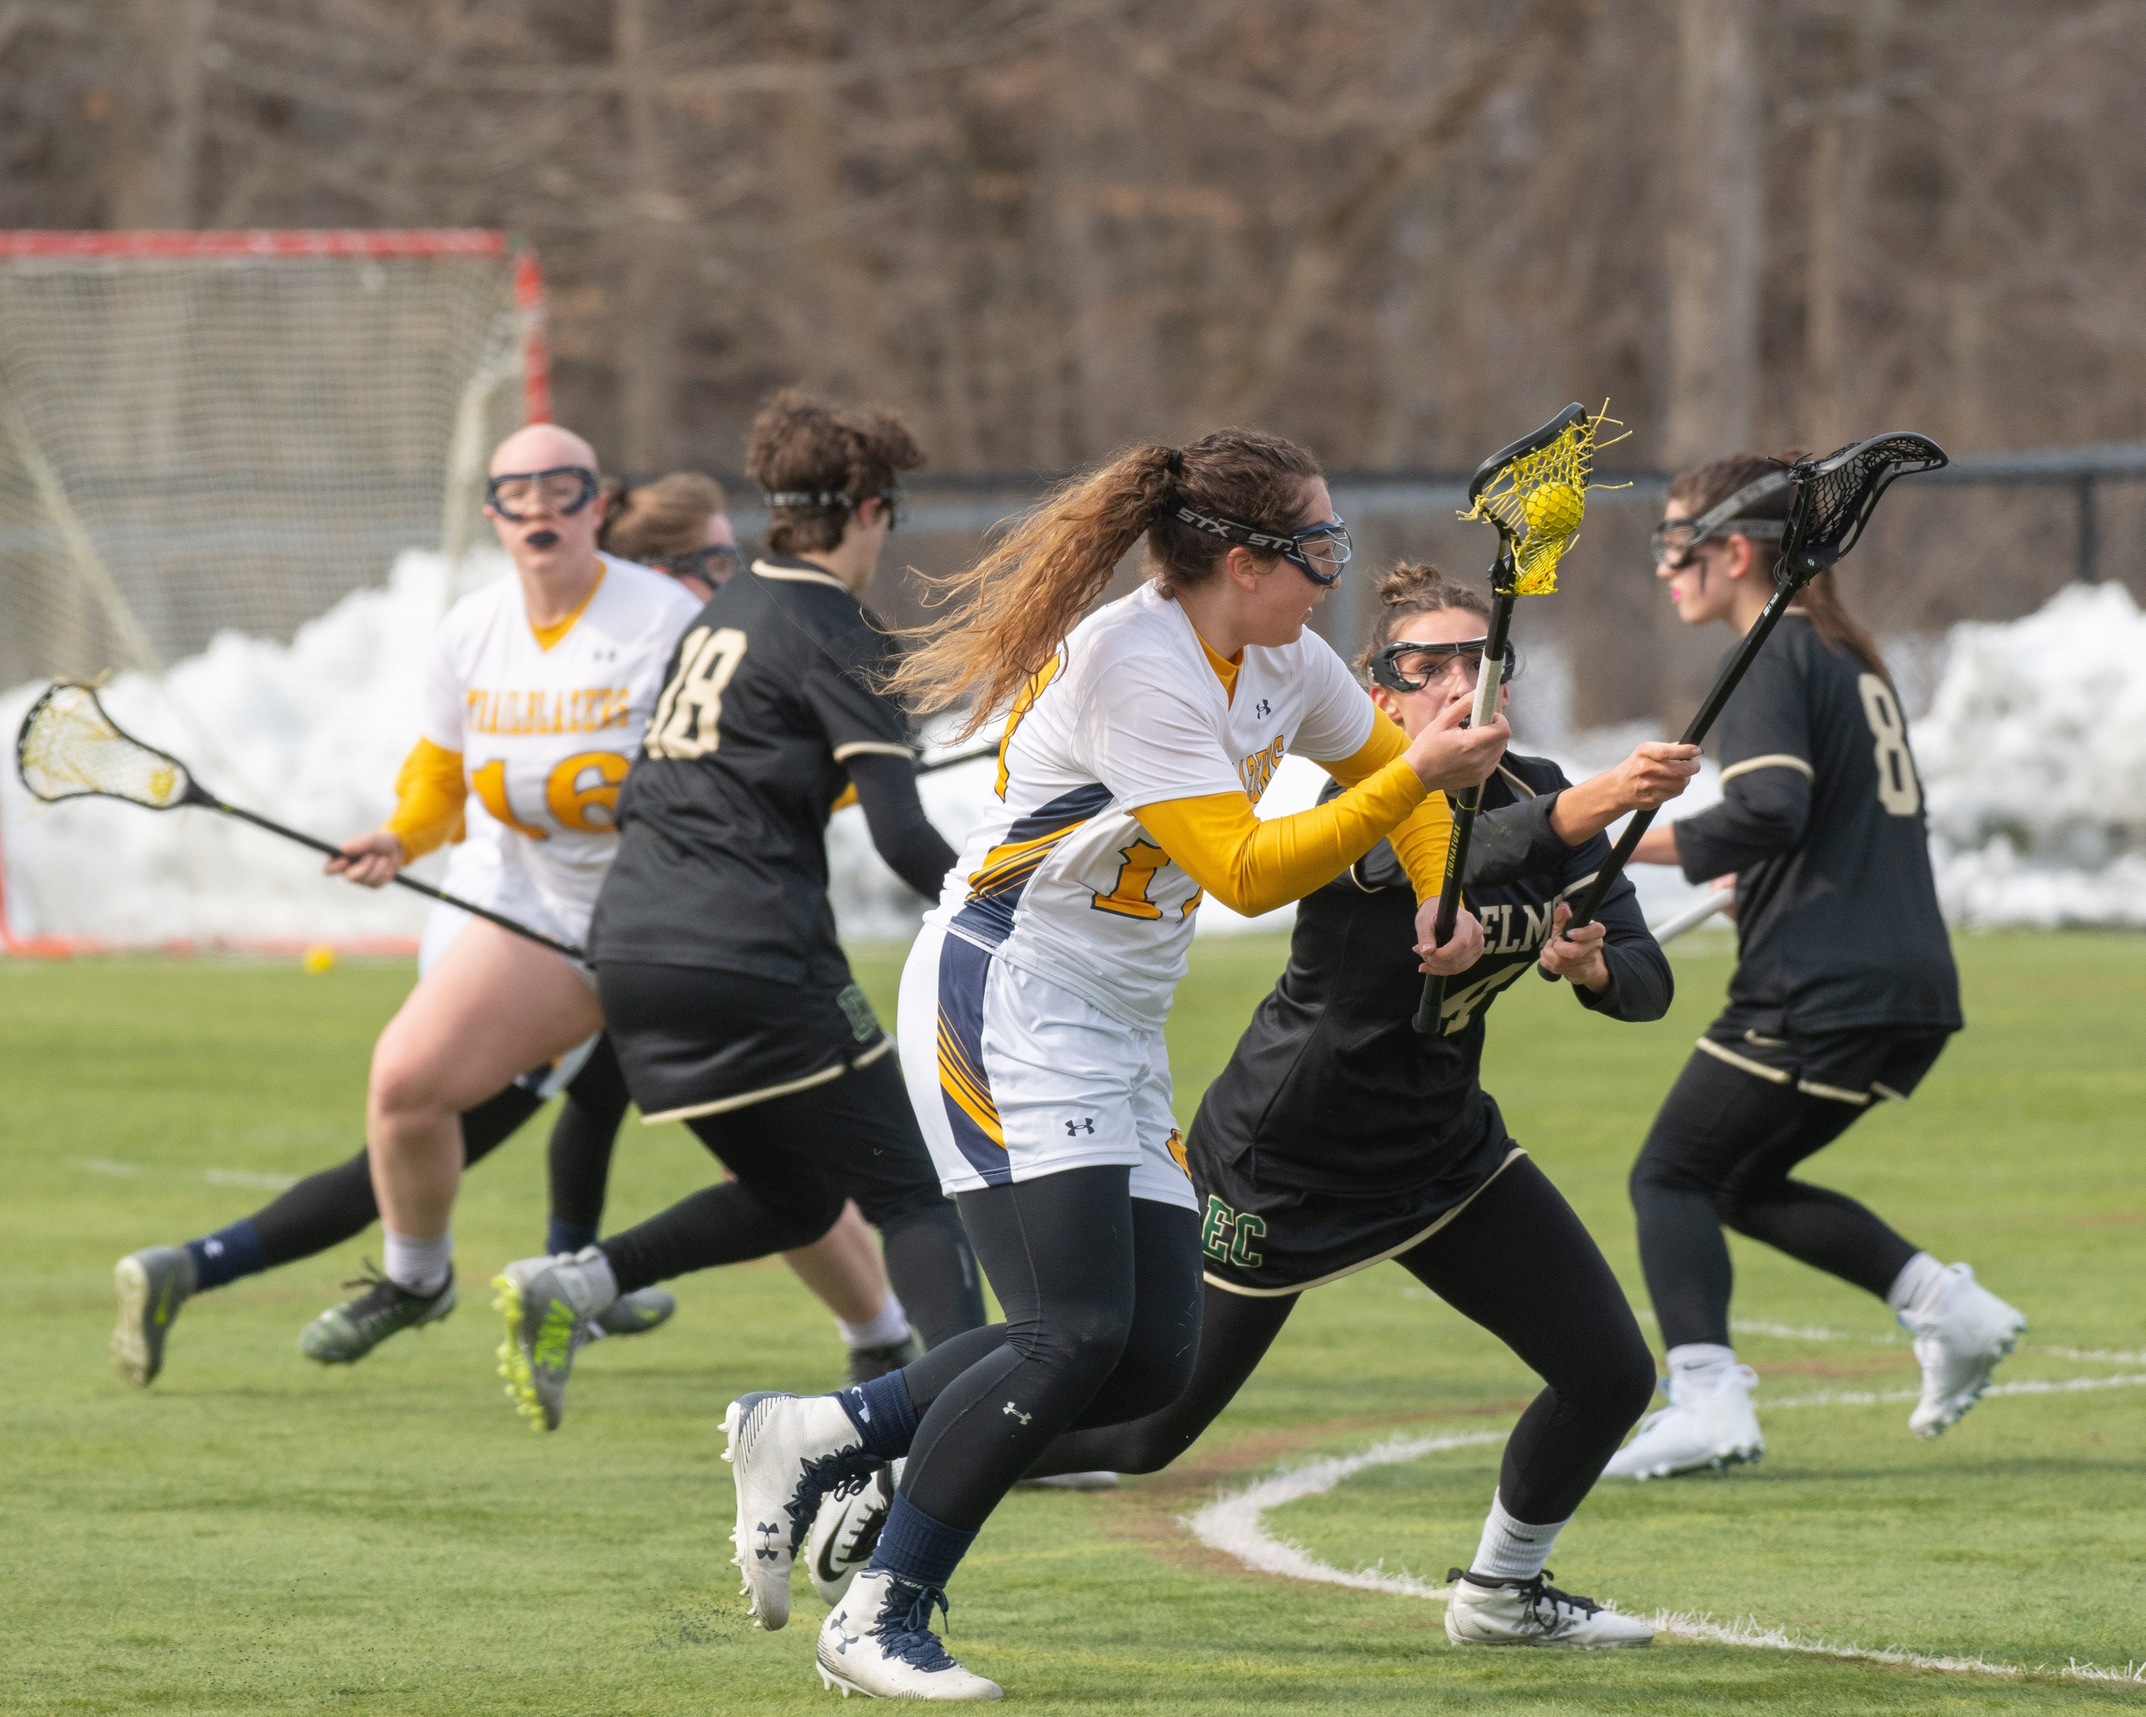 Women's Lax falls to Westfield State 14-2